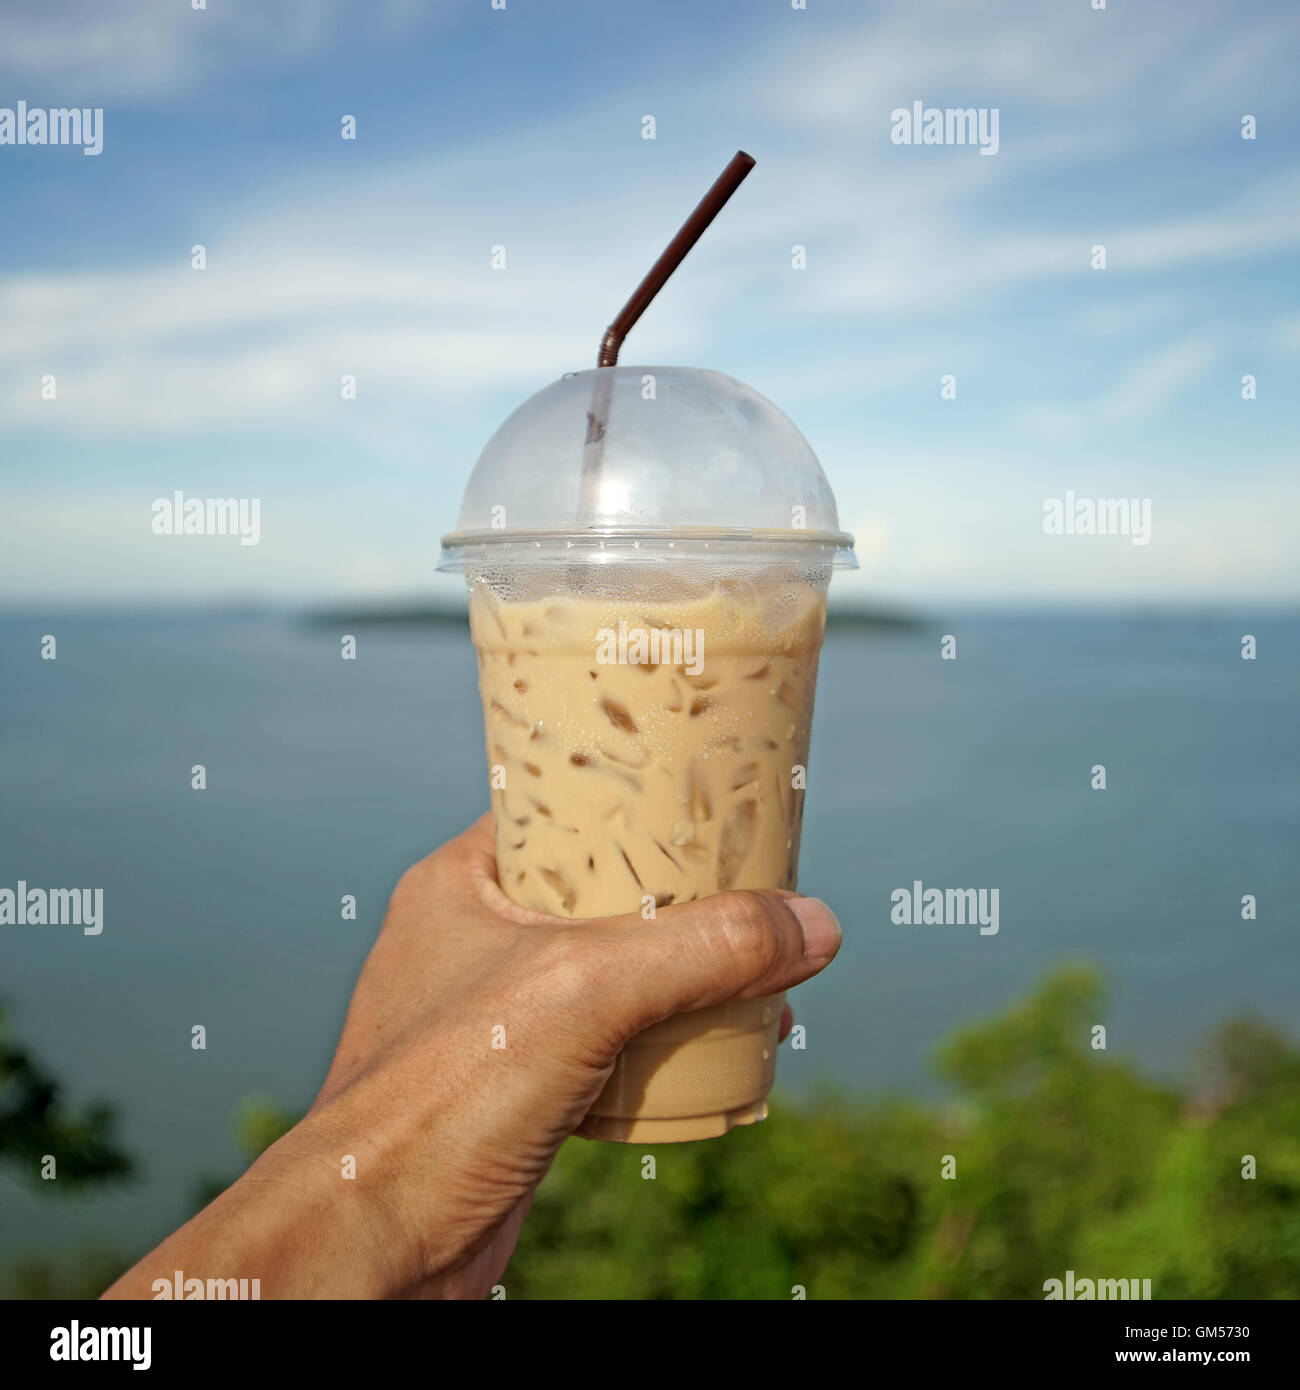 https://c8.alamy.com/comp/GM5730/ice-coffee-in-takeaway-cup-on-man-hand-GM5730.jpg